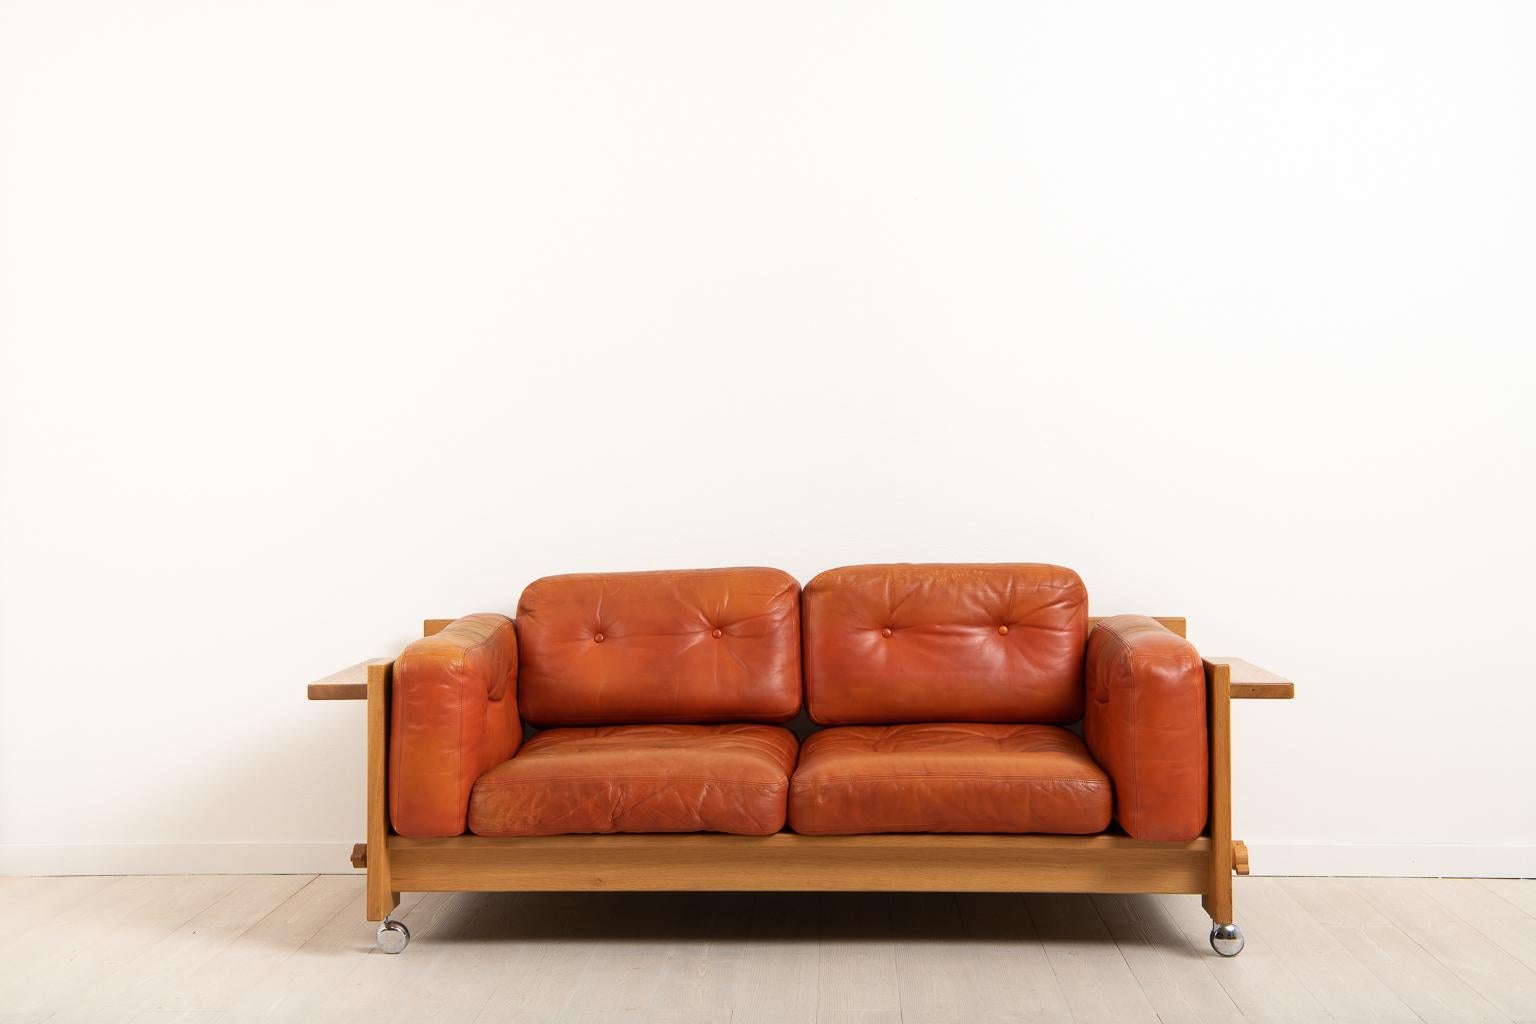 'Kontrapunkt' sofa by Yngve Ekström for Swedese. Designed in the 1960s and manufactured by Swedese, the 'Kontrapunkt' sofa is a good example of Swedish and Scandinavian midcentury design. Loose cushions upholstered in leather. The frame is made from